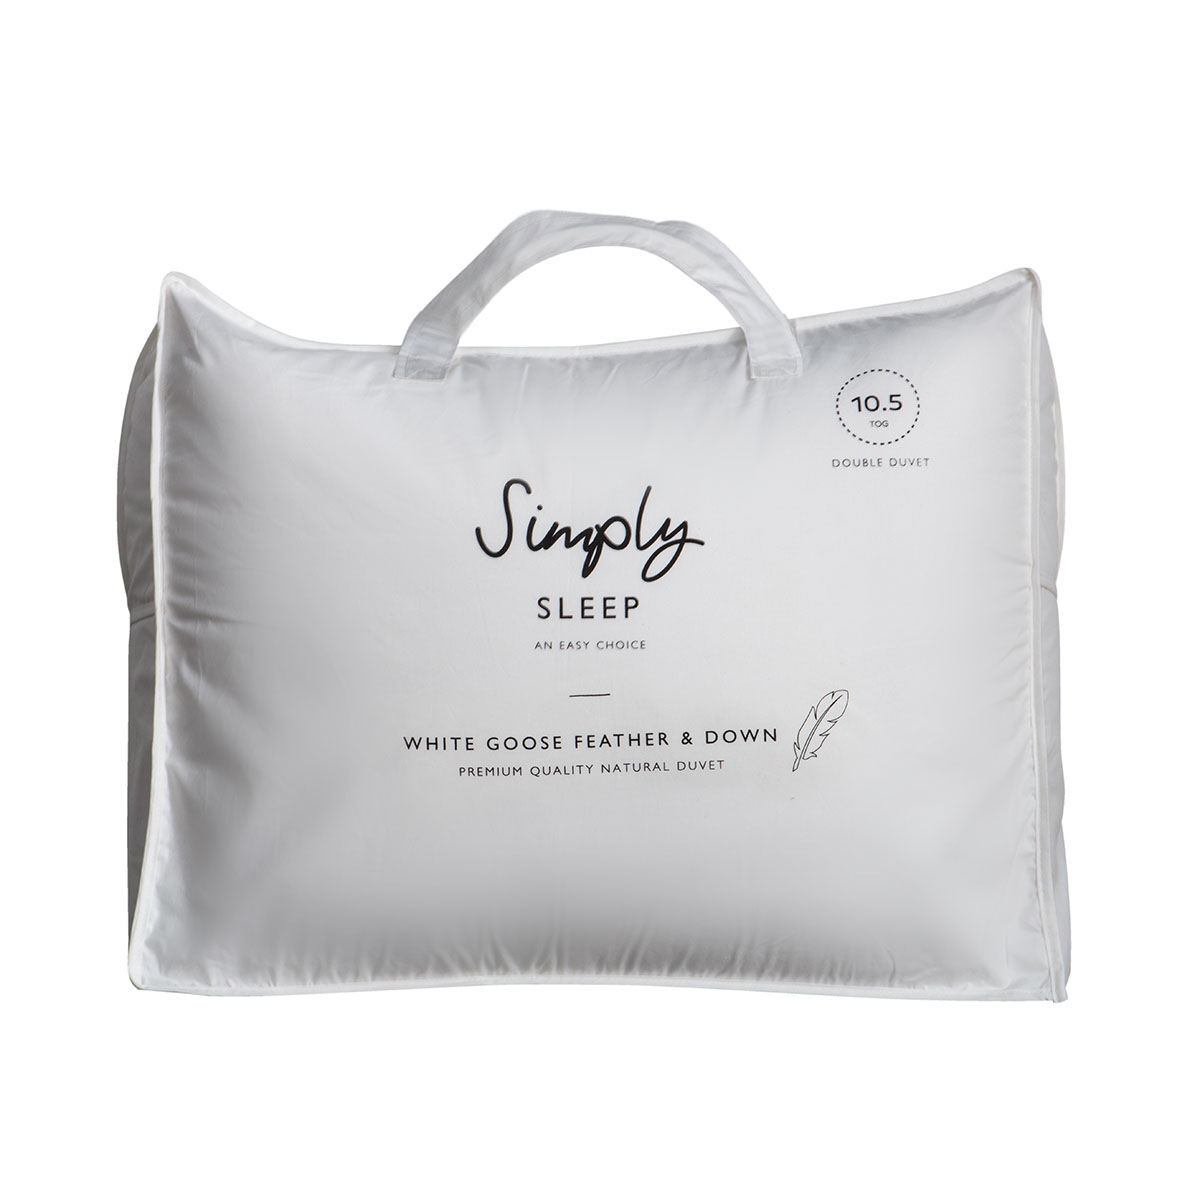 SS White Goose Feather & Down Dble Duvet 10.5 tog